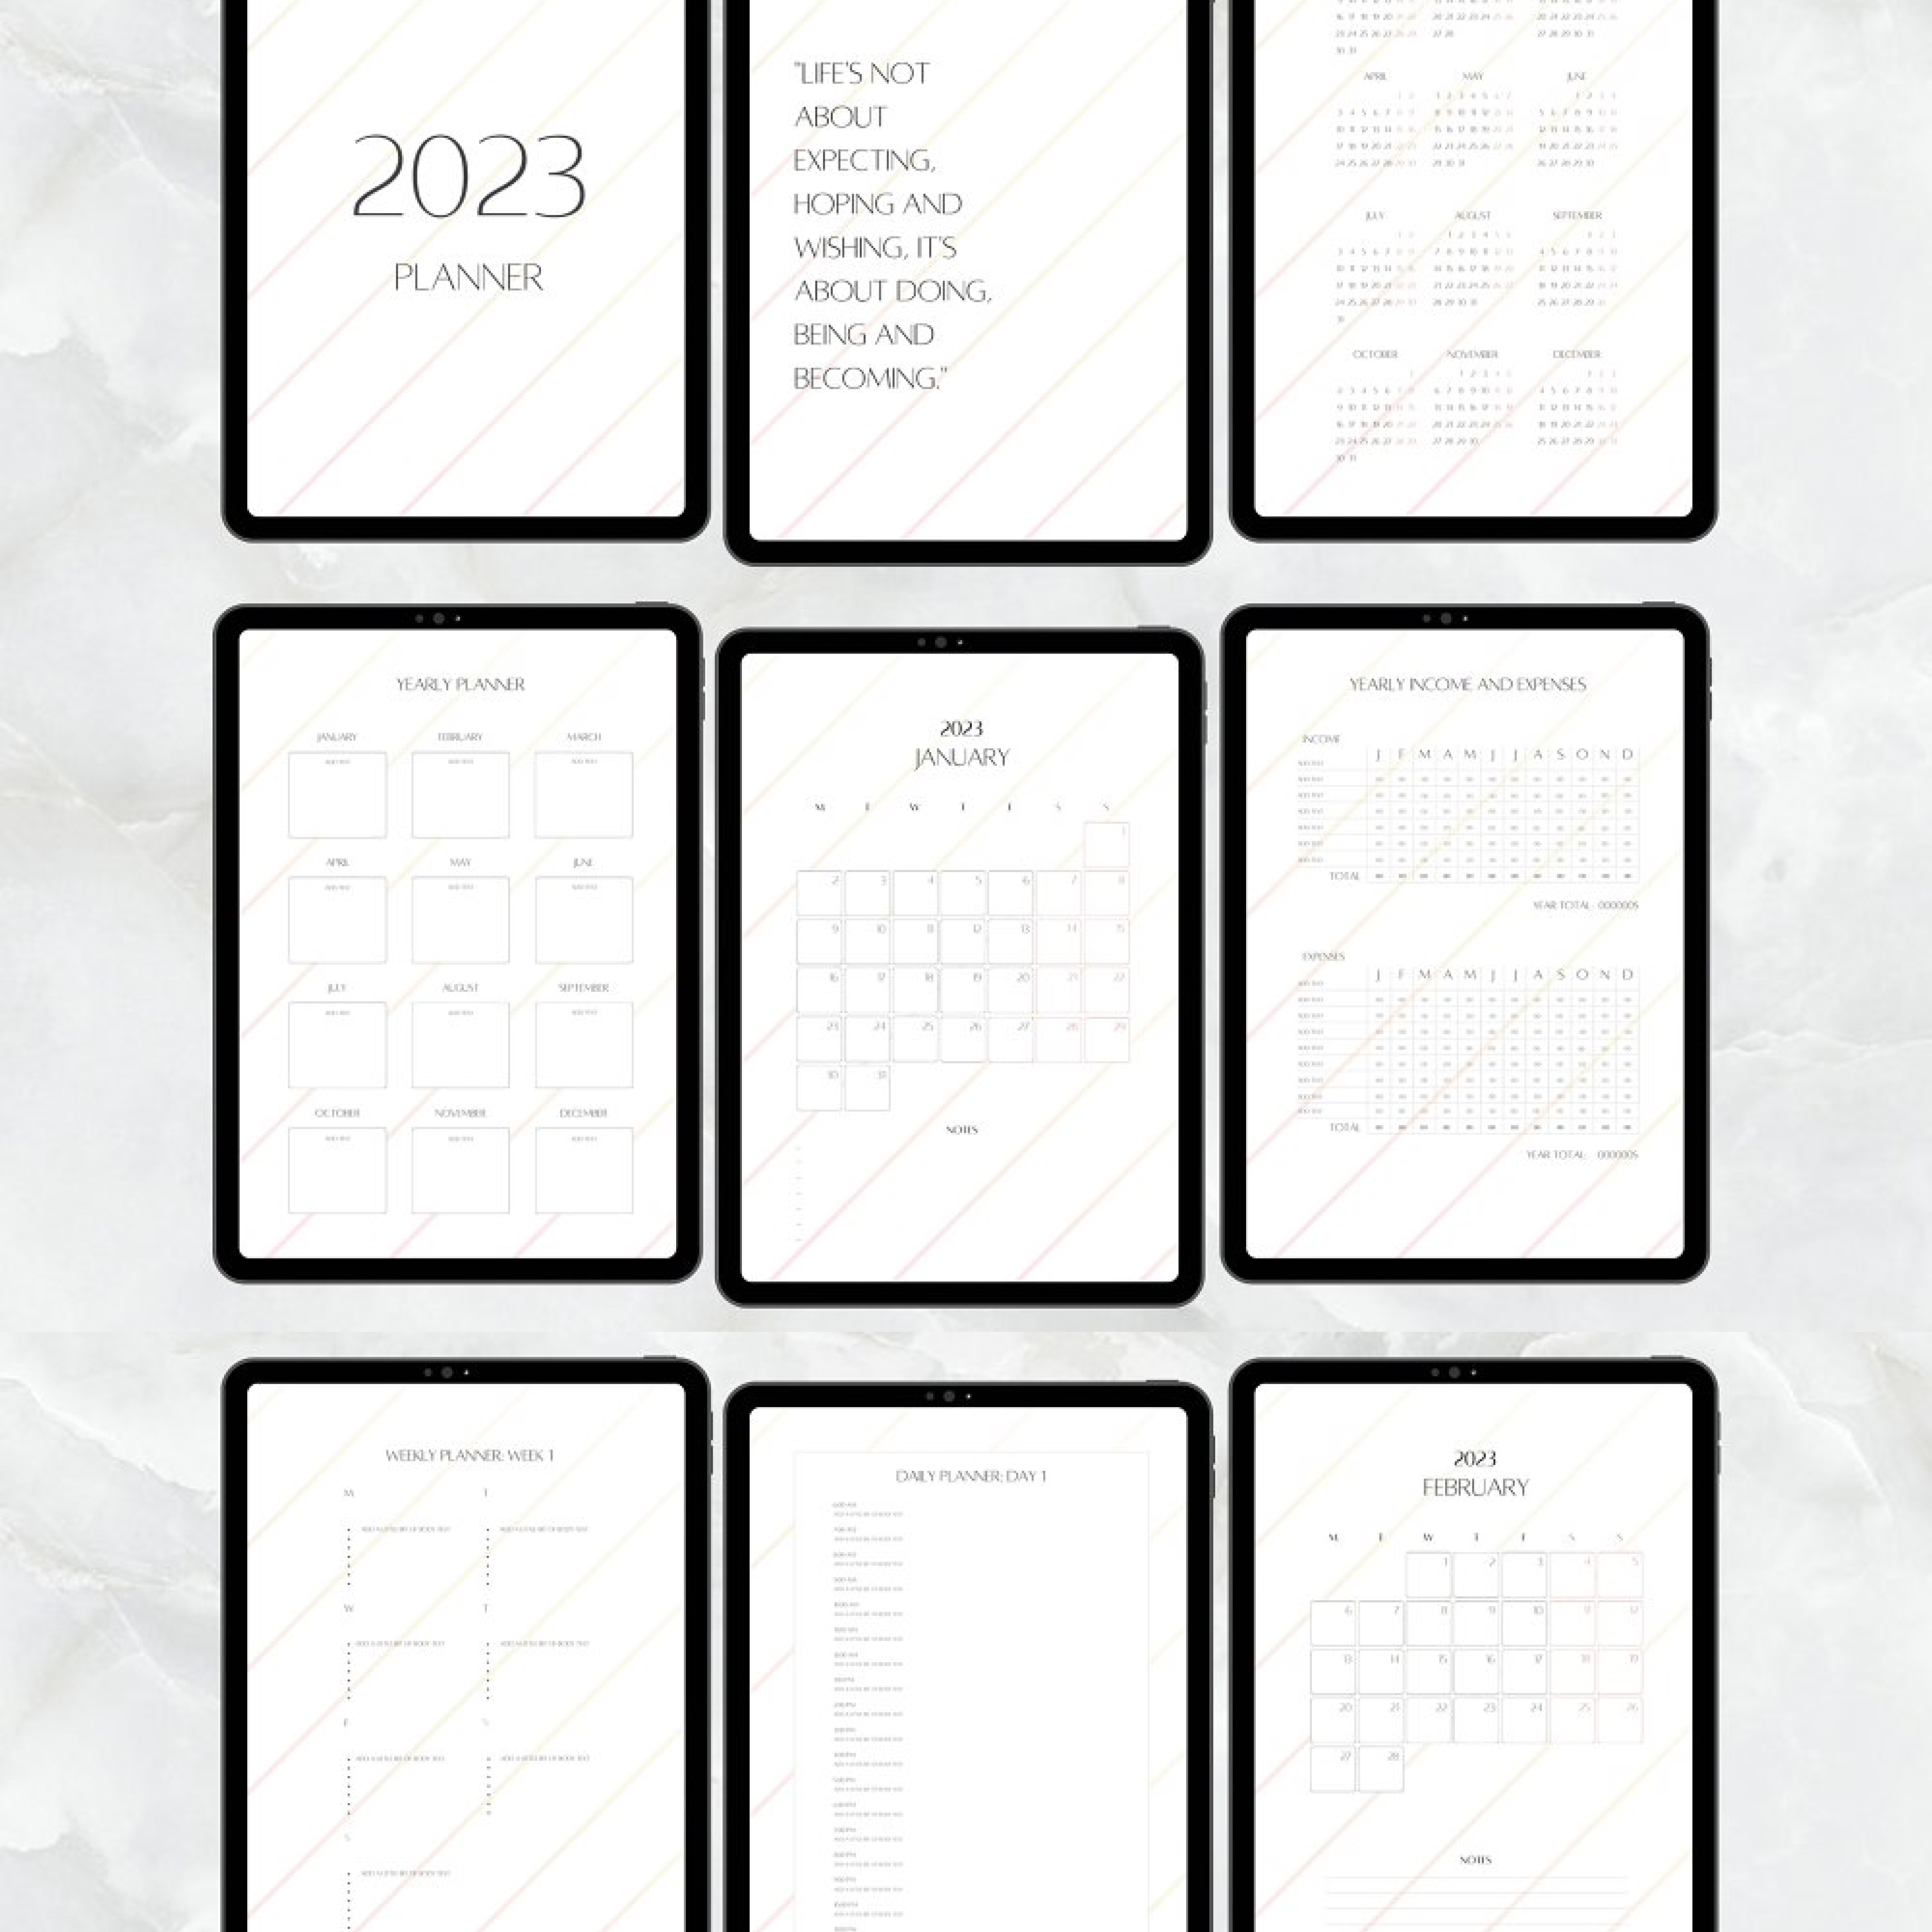 Preview printable planner note book.